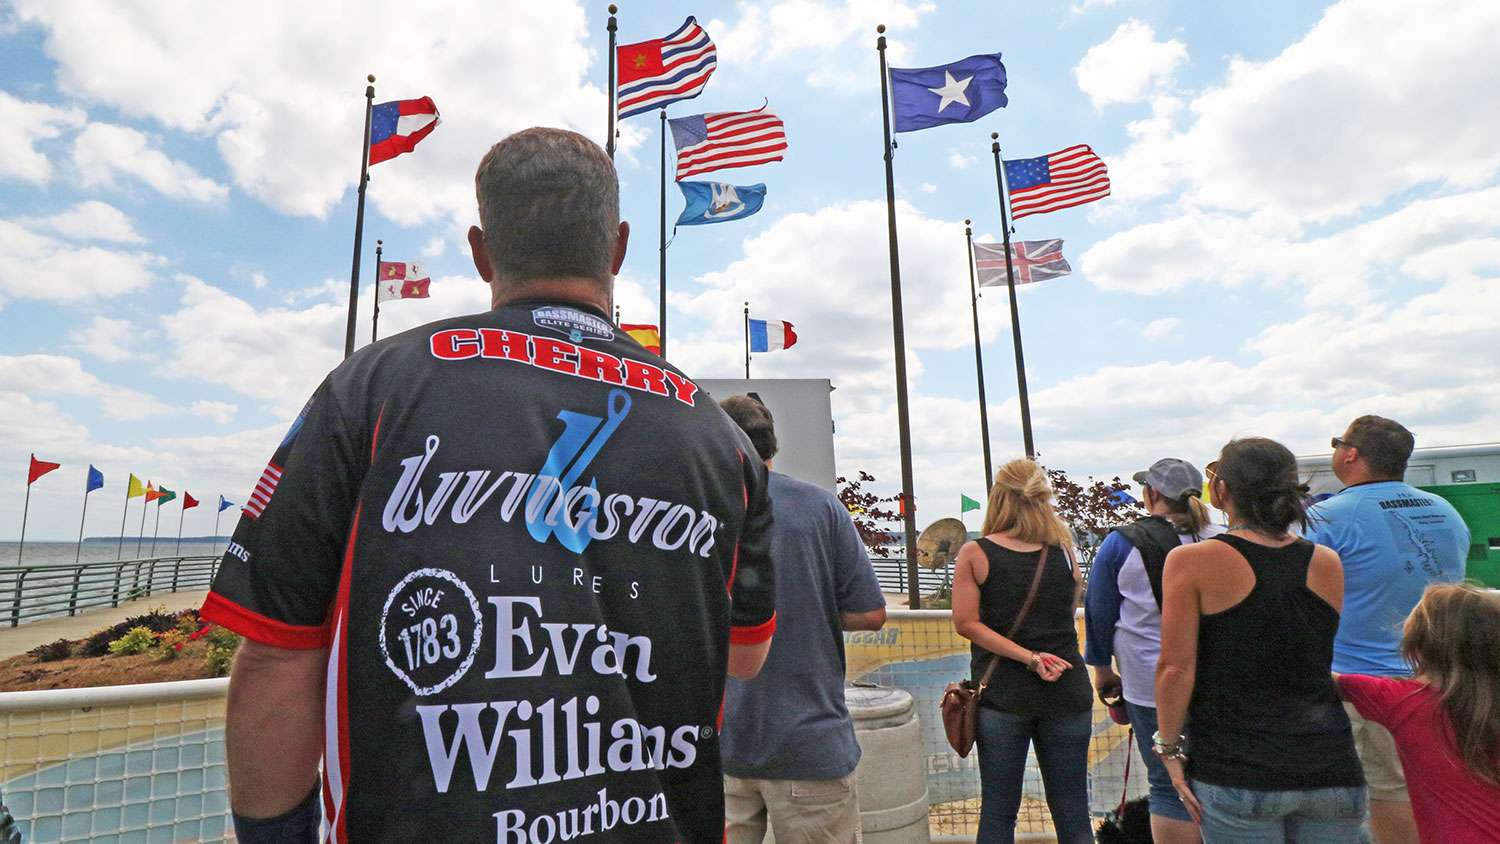 Every B.A.S.S. weigh-in begins the same every day. That is by honoring the nation and paying respect for fellow anglersâand othersâwho serve the country. âI have tremendous respect for what they do, and know a lot of those folks are bass fishermen, wishing they could be here now on the lake.â 
